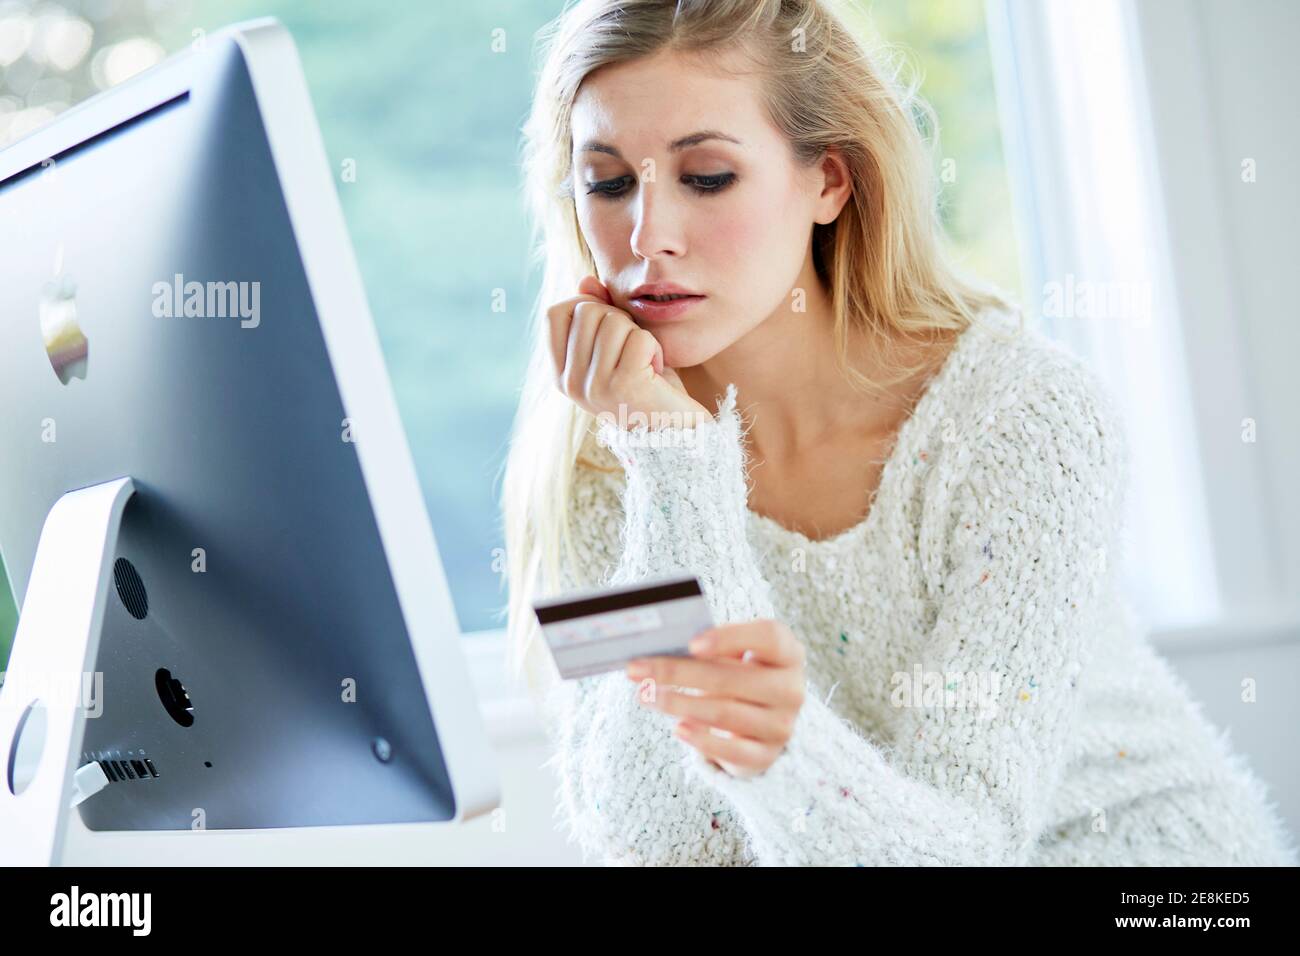 Woman holding her credit card purchasing items online Stock Photo